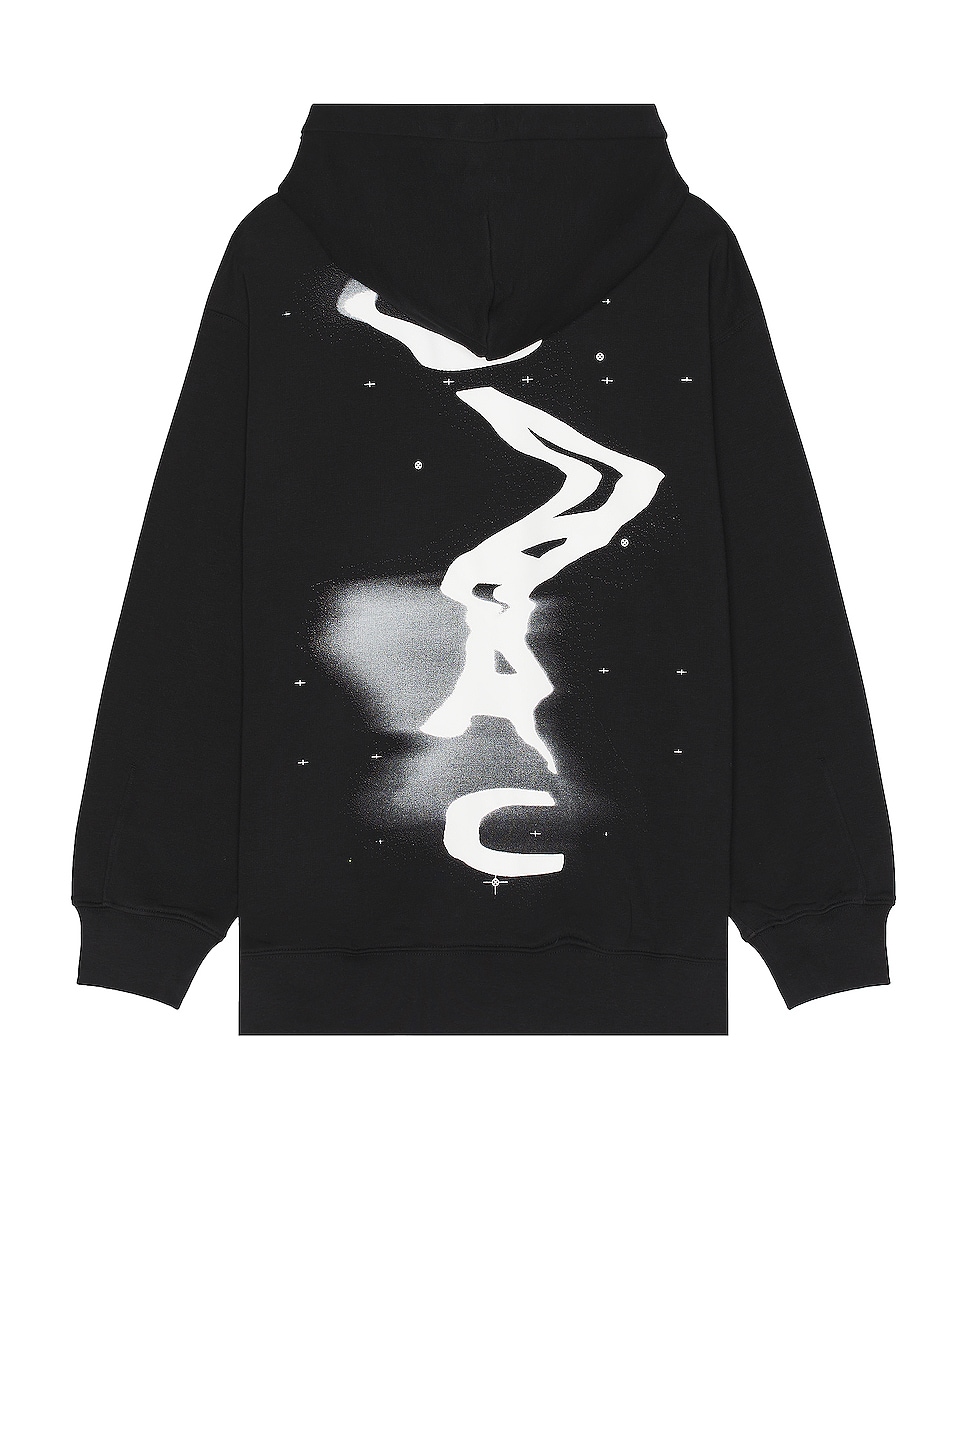 Image 1 of On Graphic Club Hoodie in Black & White